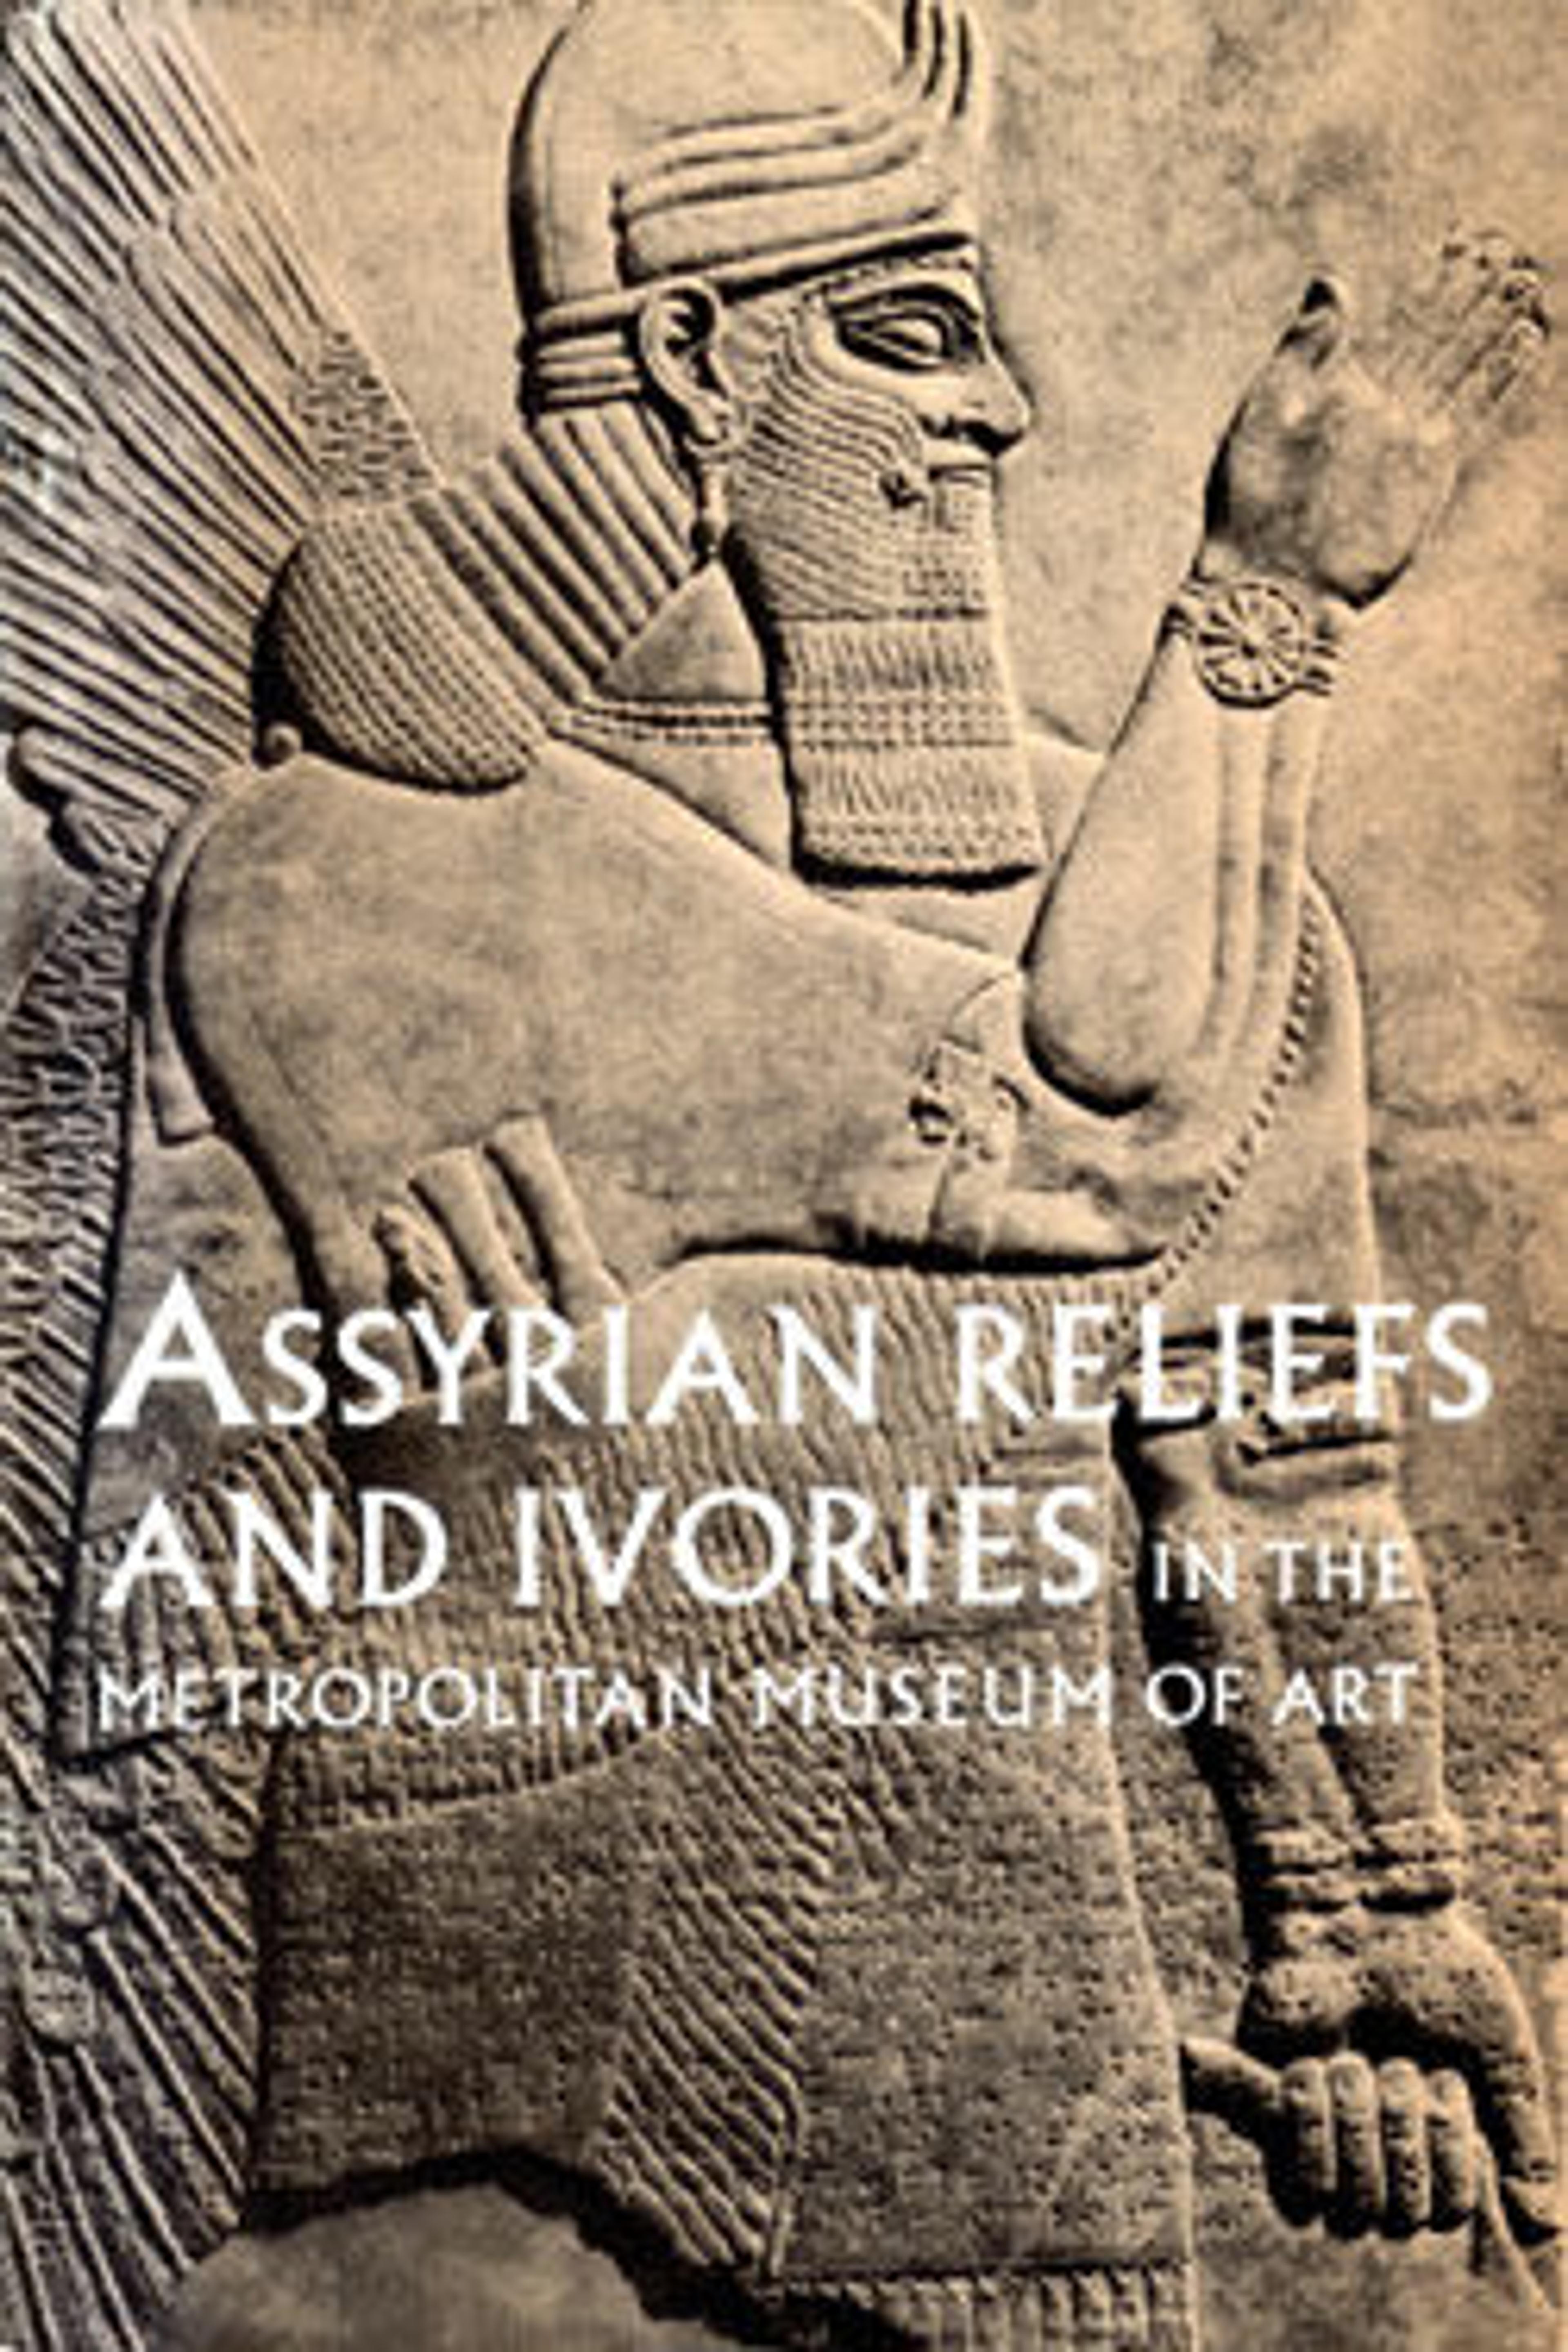 Assyrian Reliefs and Ivories in The Metropolitan Museum of Art: Palace Reliefs of Assurnasirpal II and Ivory Carvings from Nimrud